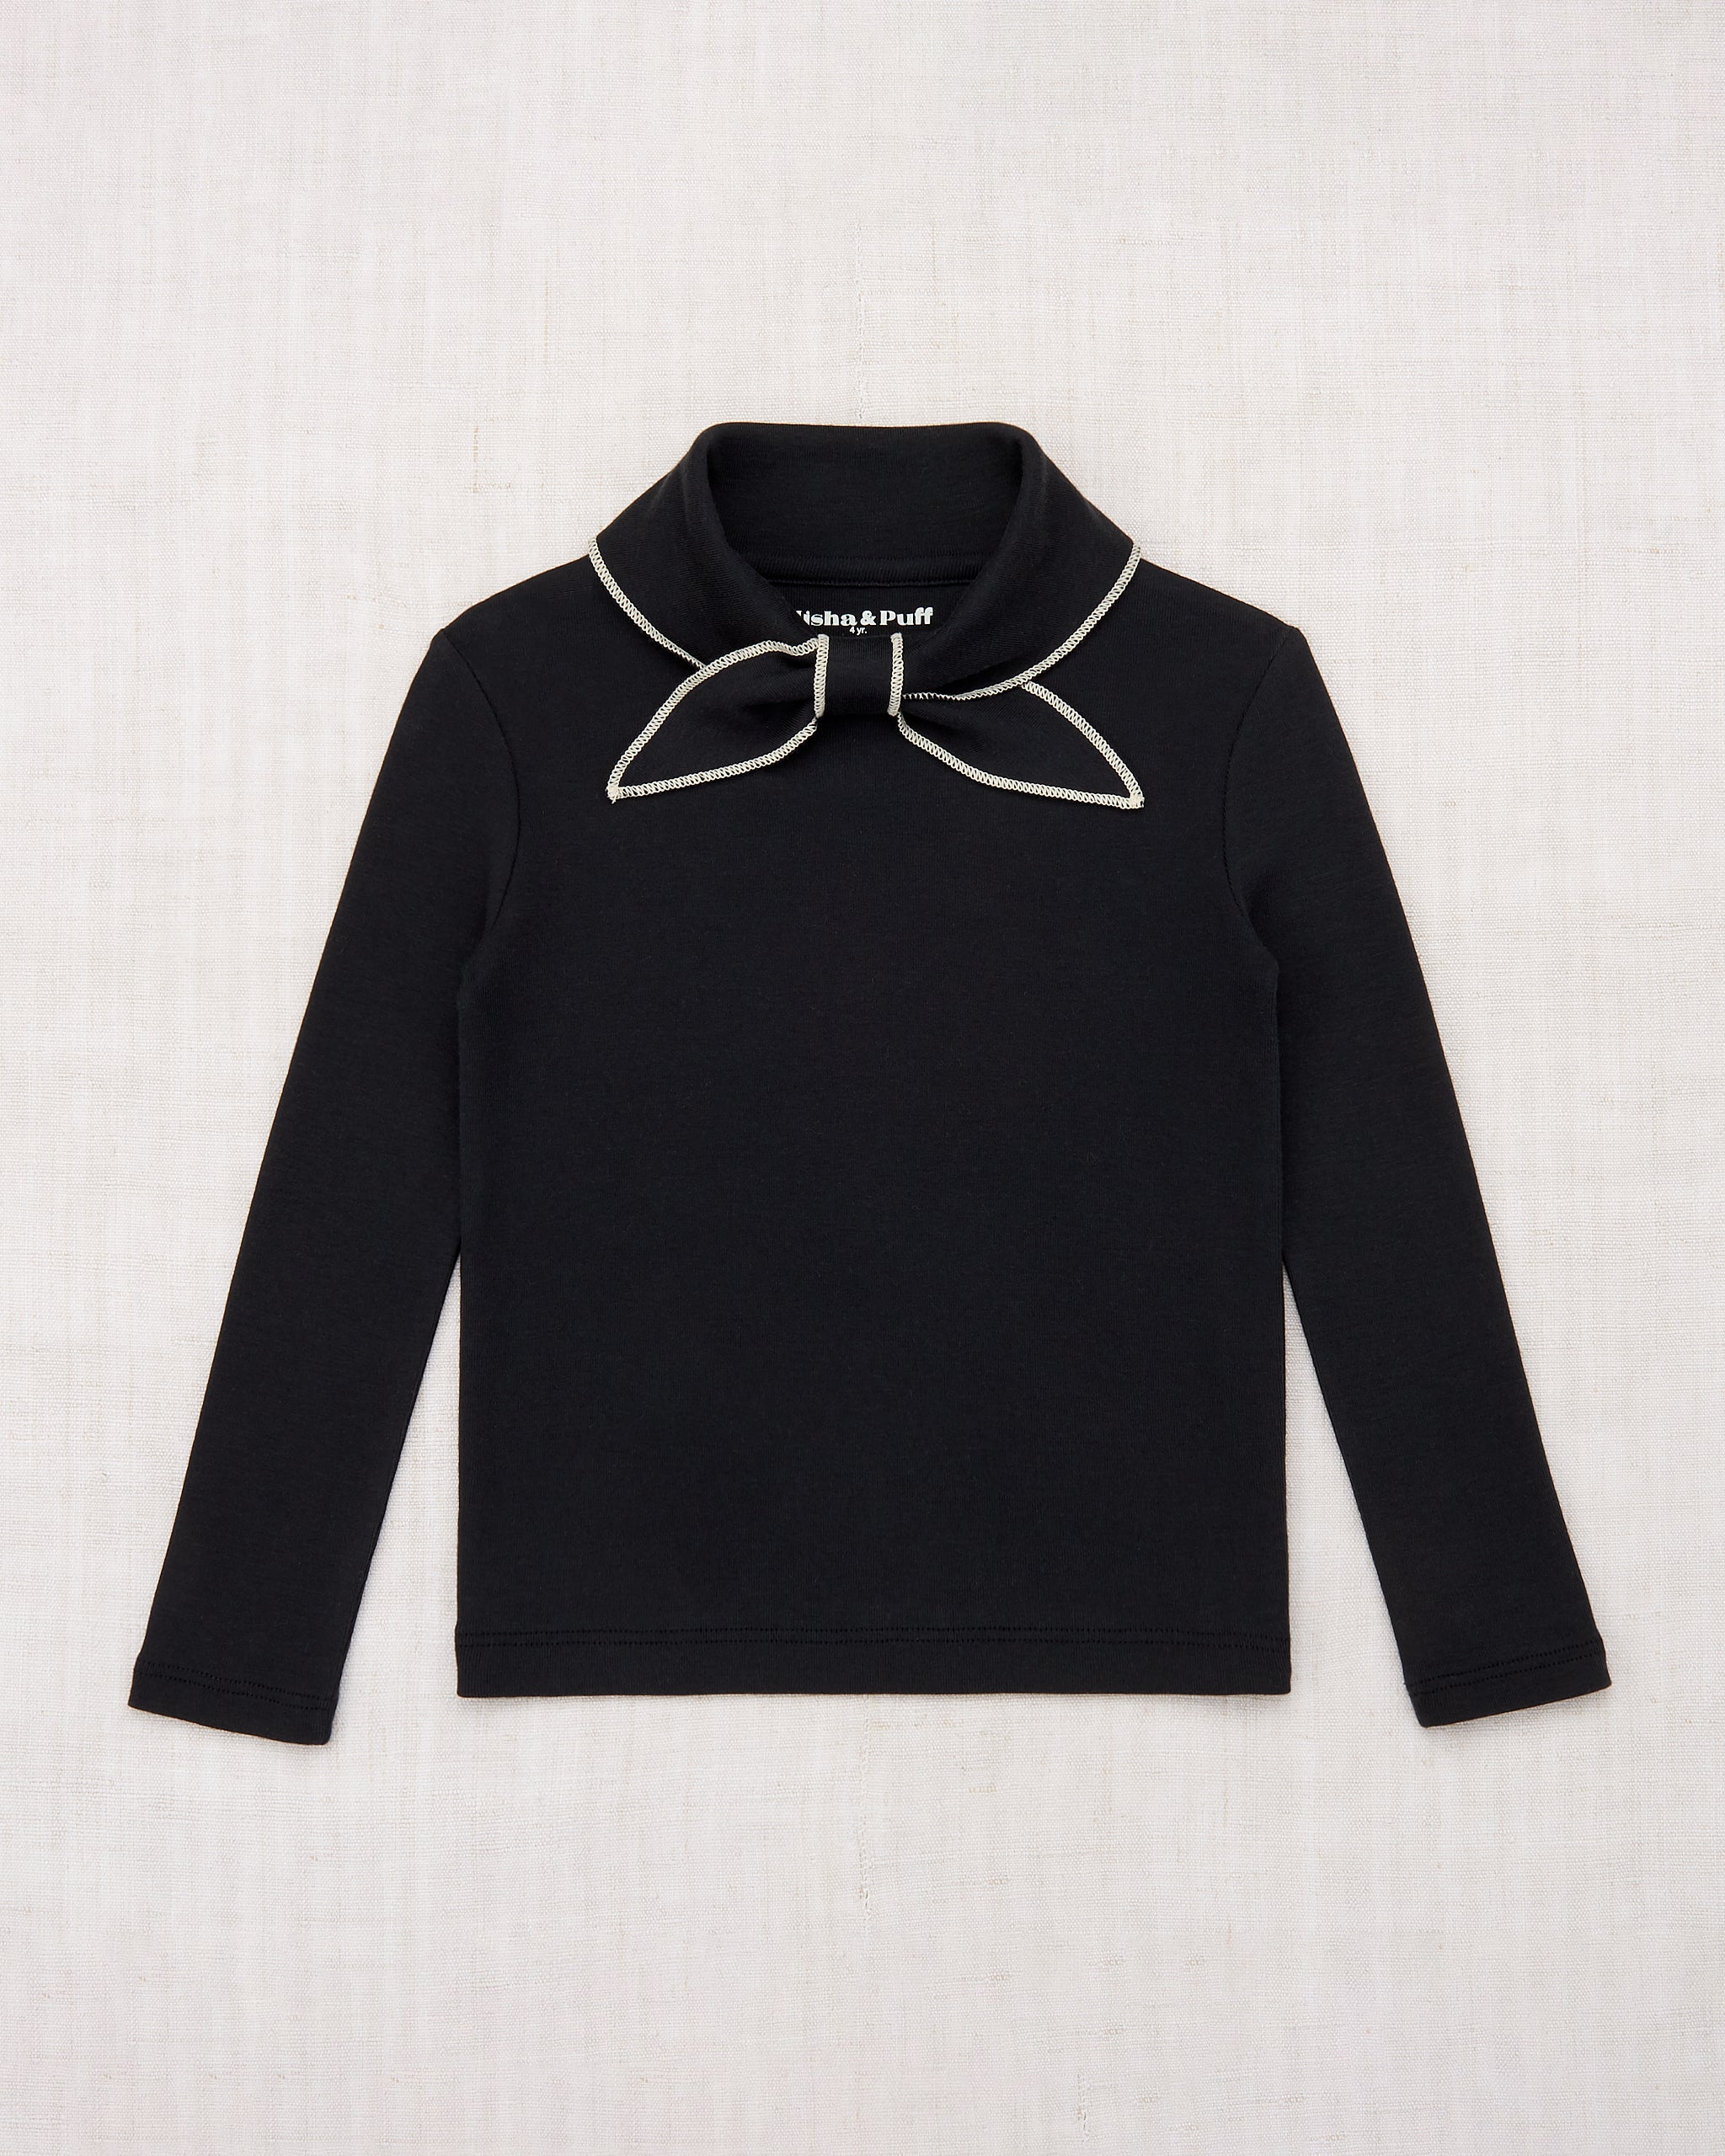 misha and puff scout top licorice 6y - トップス